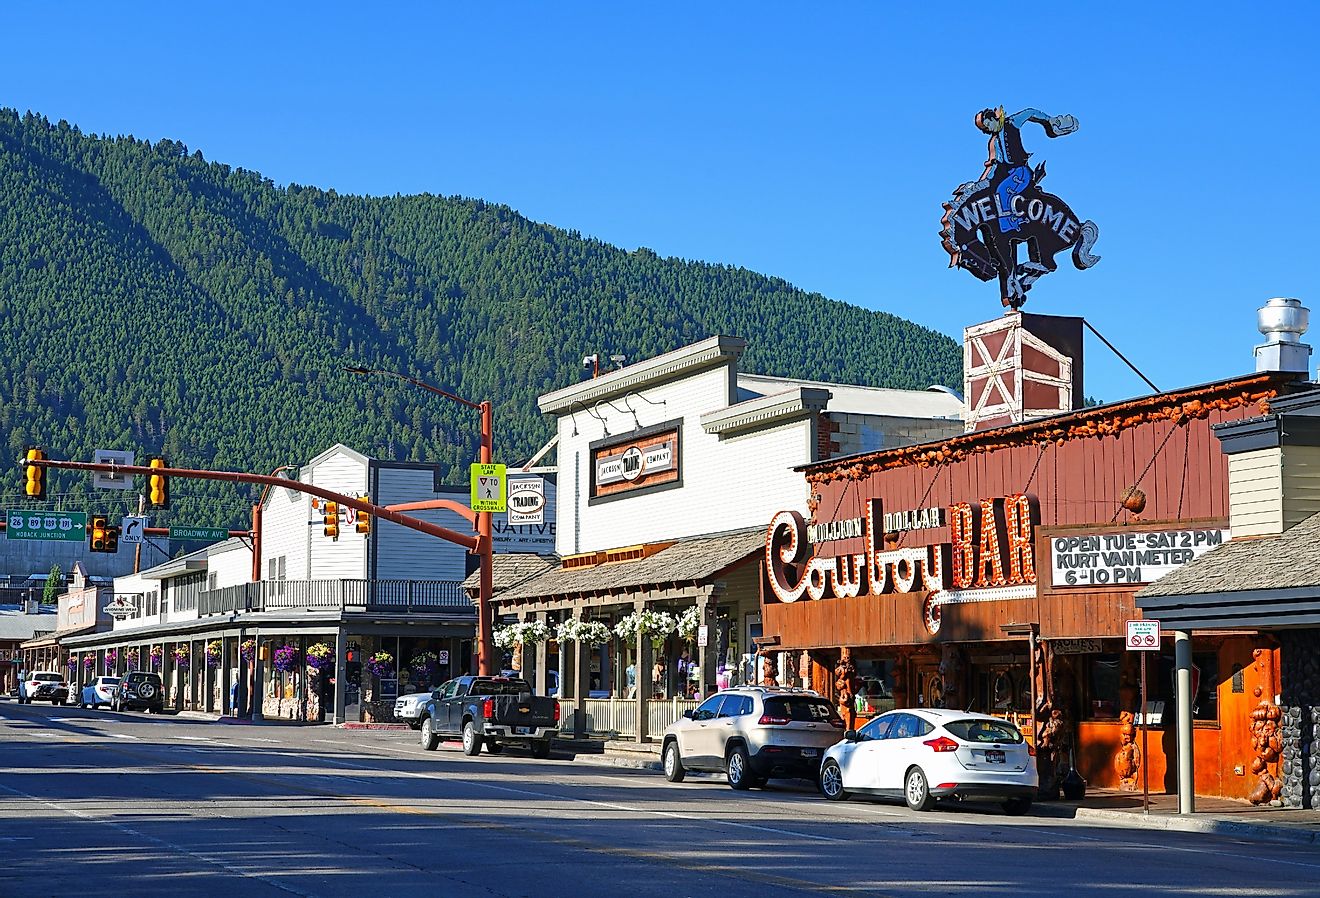 Downtown Jackson Hole, Wyoming. Image credit EQRoy via Shutterstock